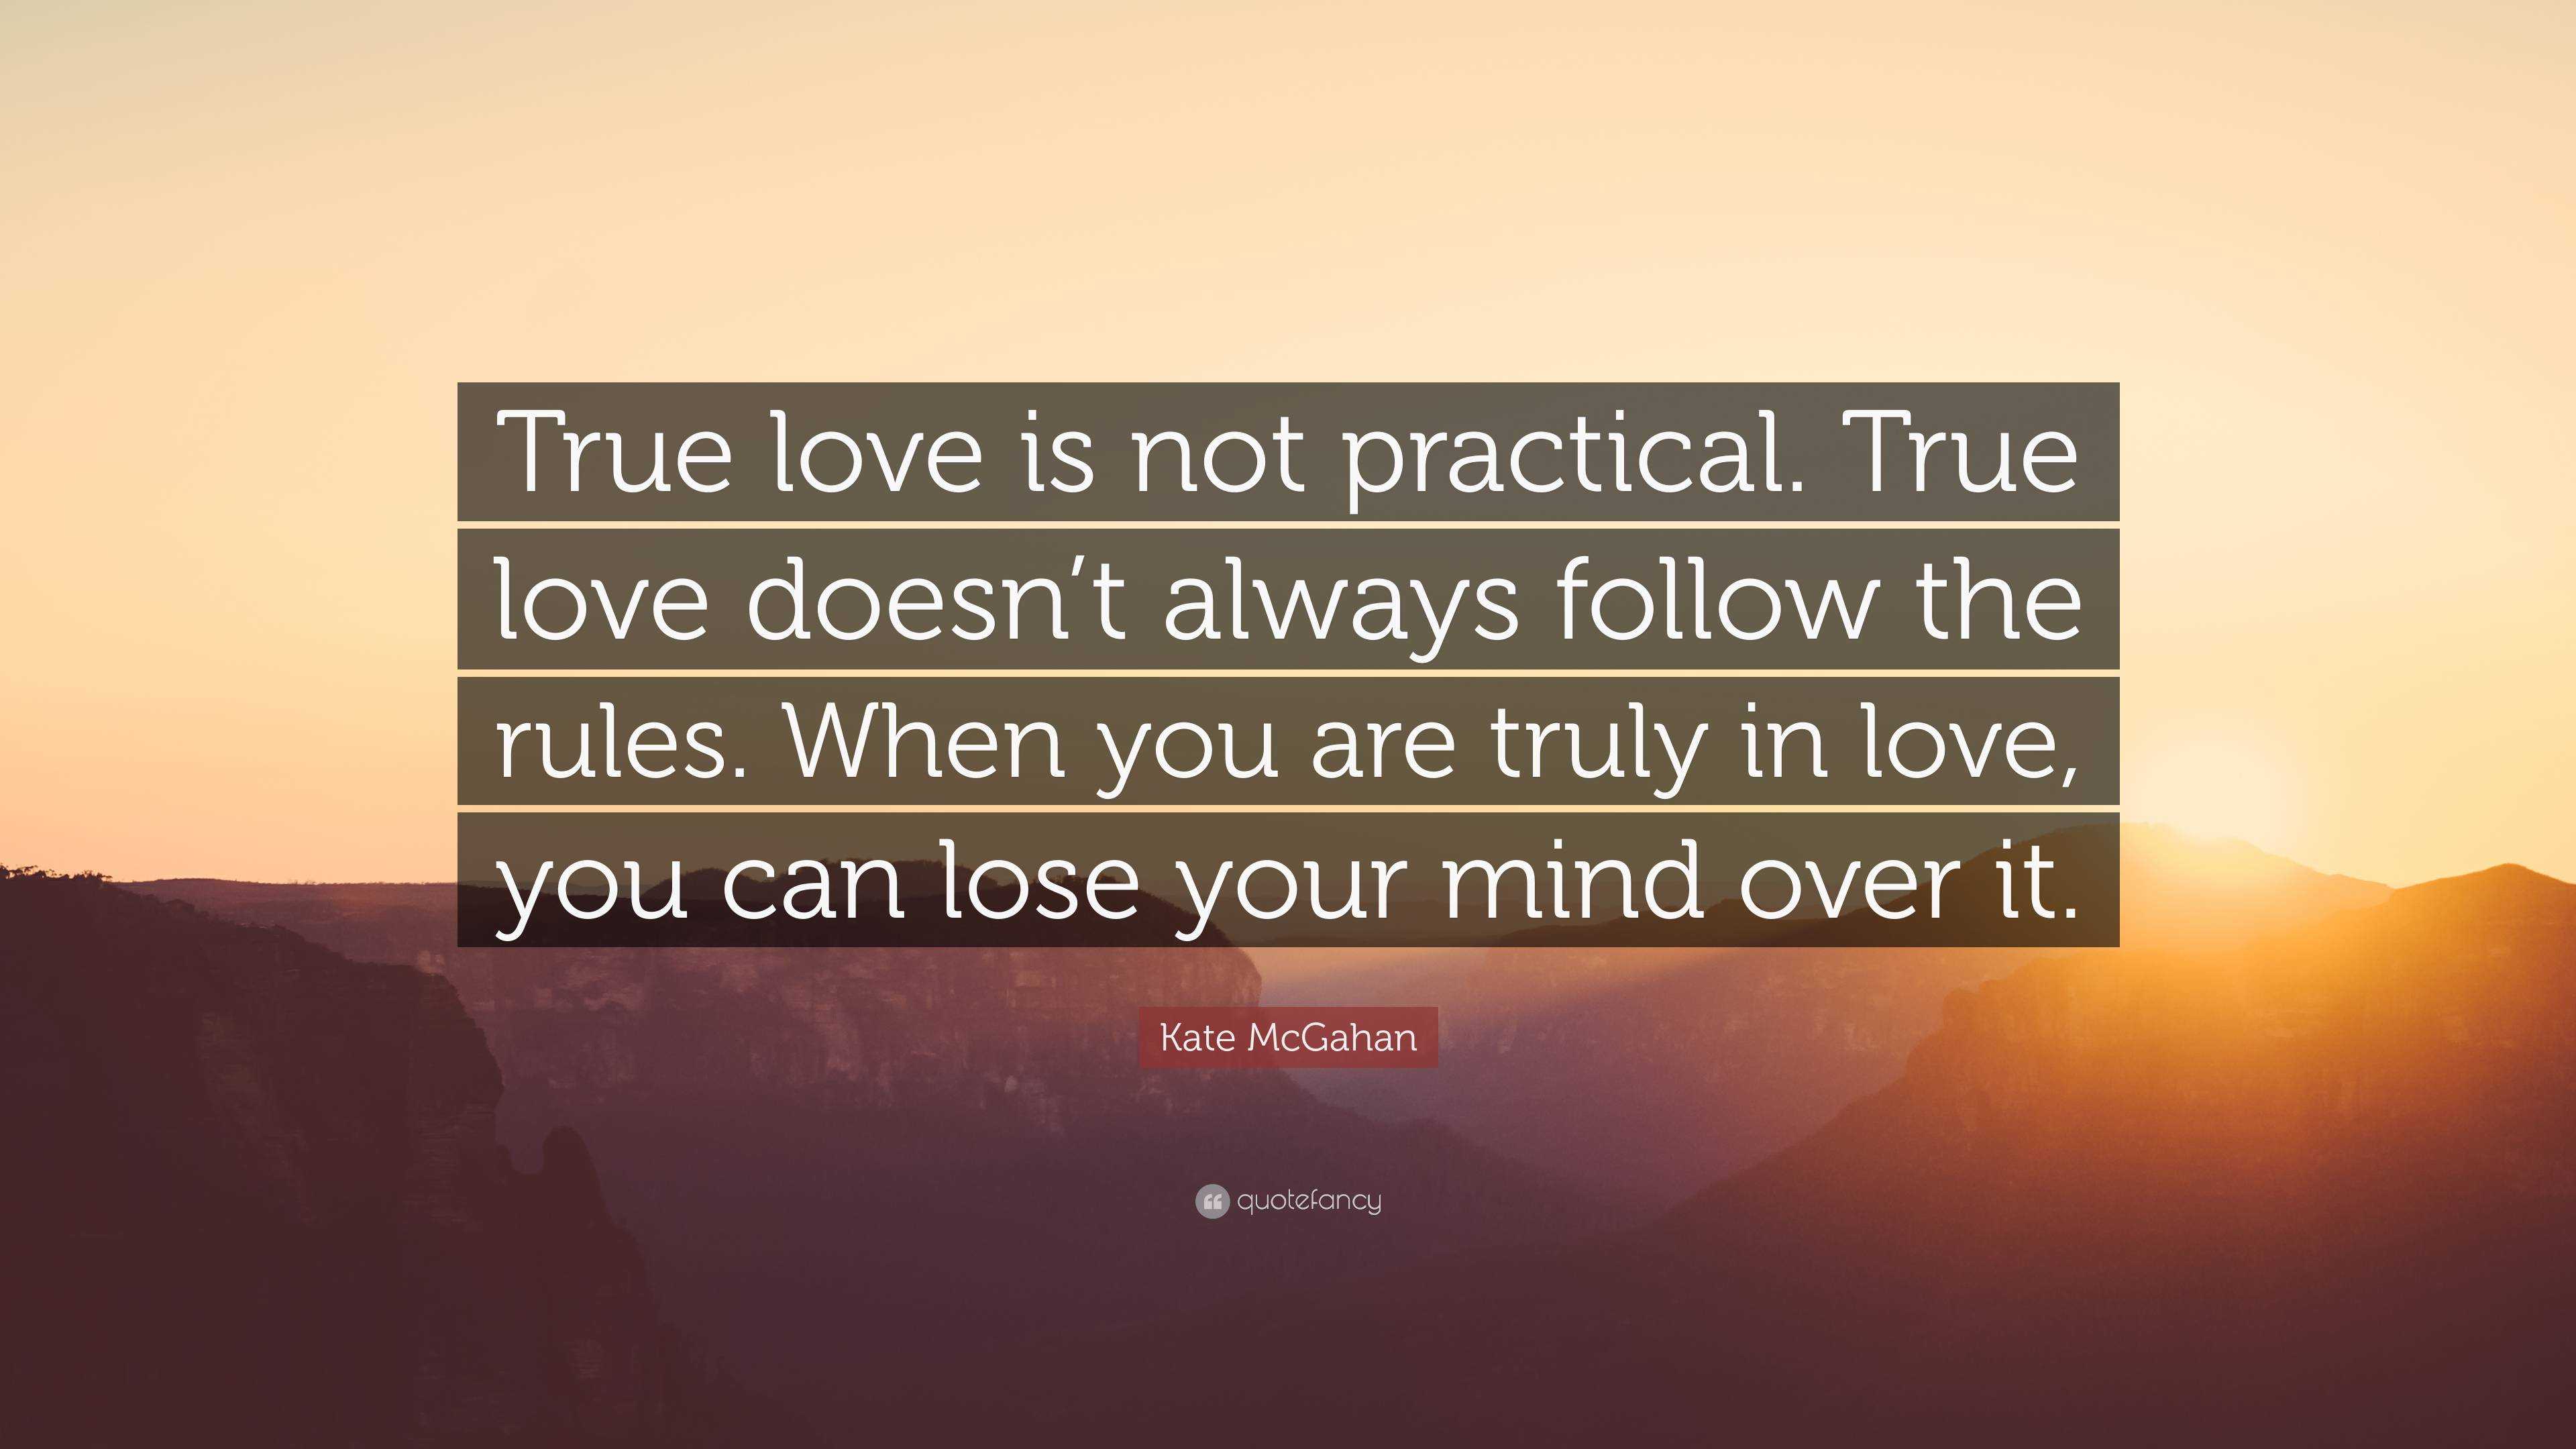 True Love: What Love Is and What It Is Not